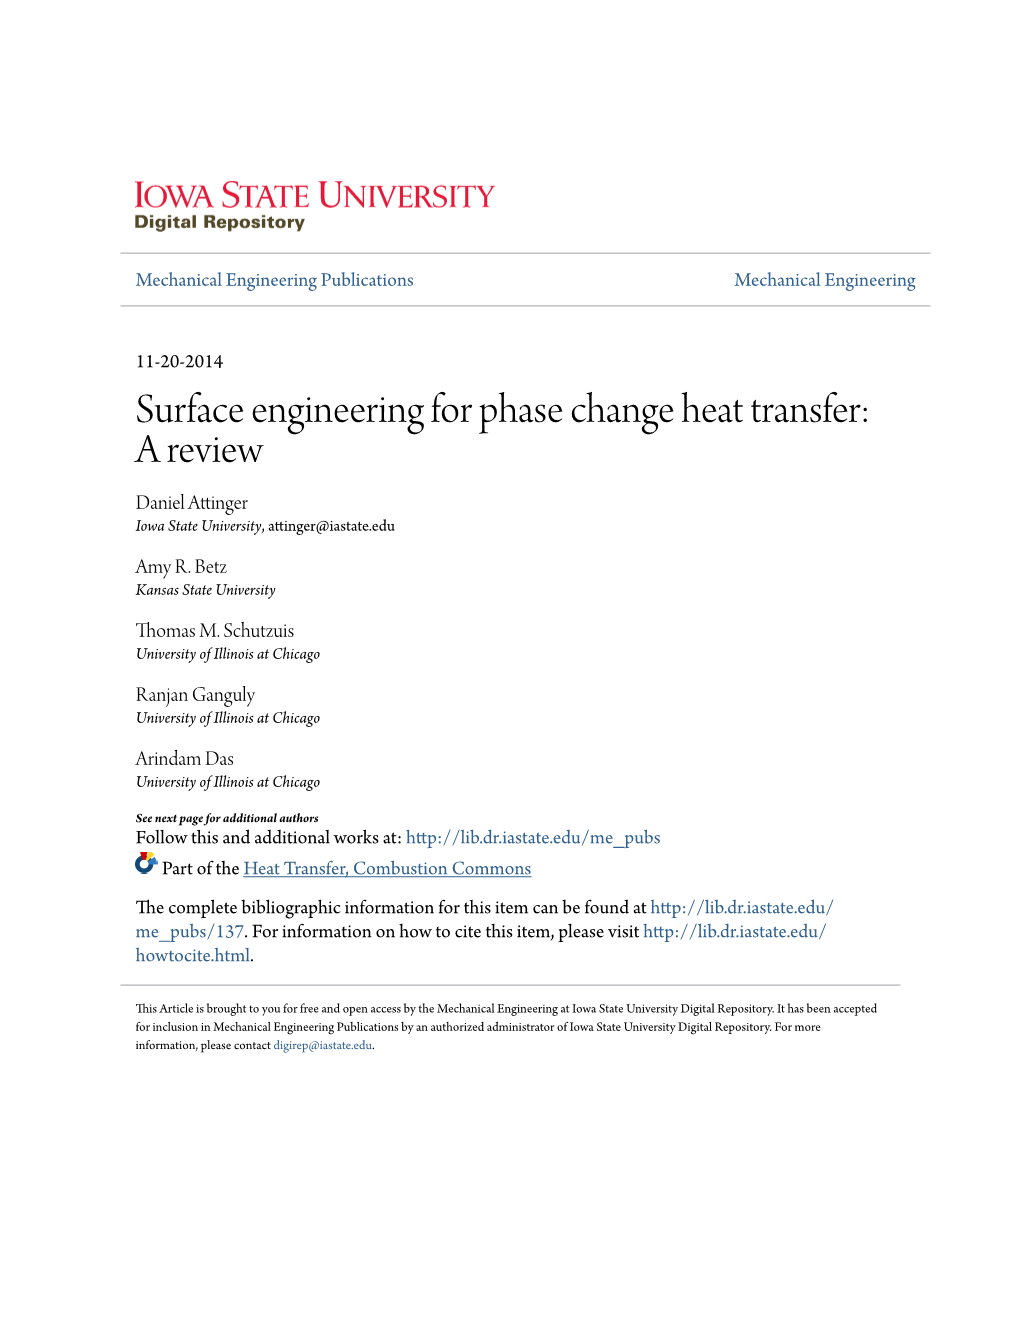 Surface Engineering for Phase Change Heat Transfer: a Review Daniel Attinger Iowa State University, Attinger@Iastate.Edu